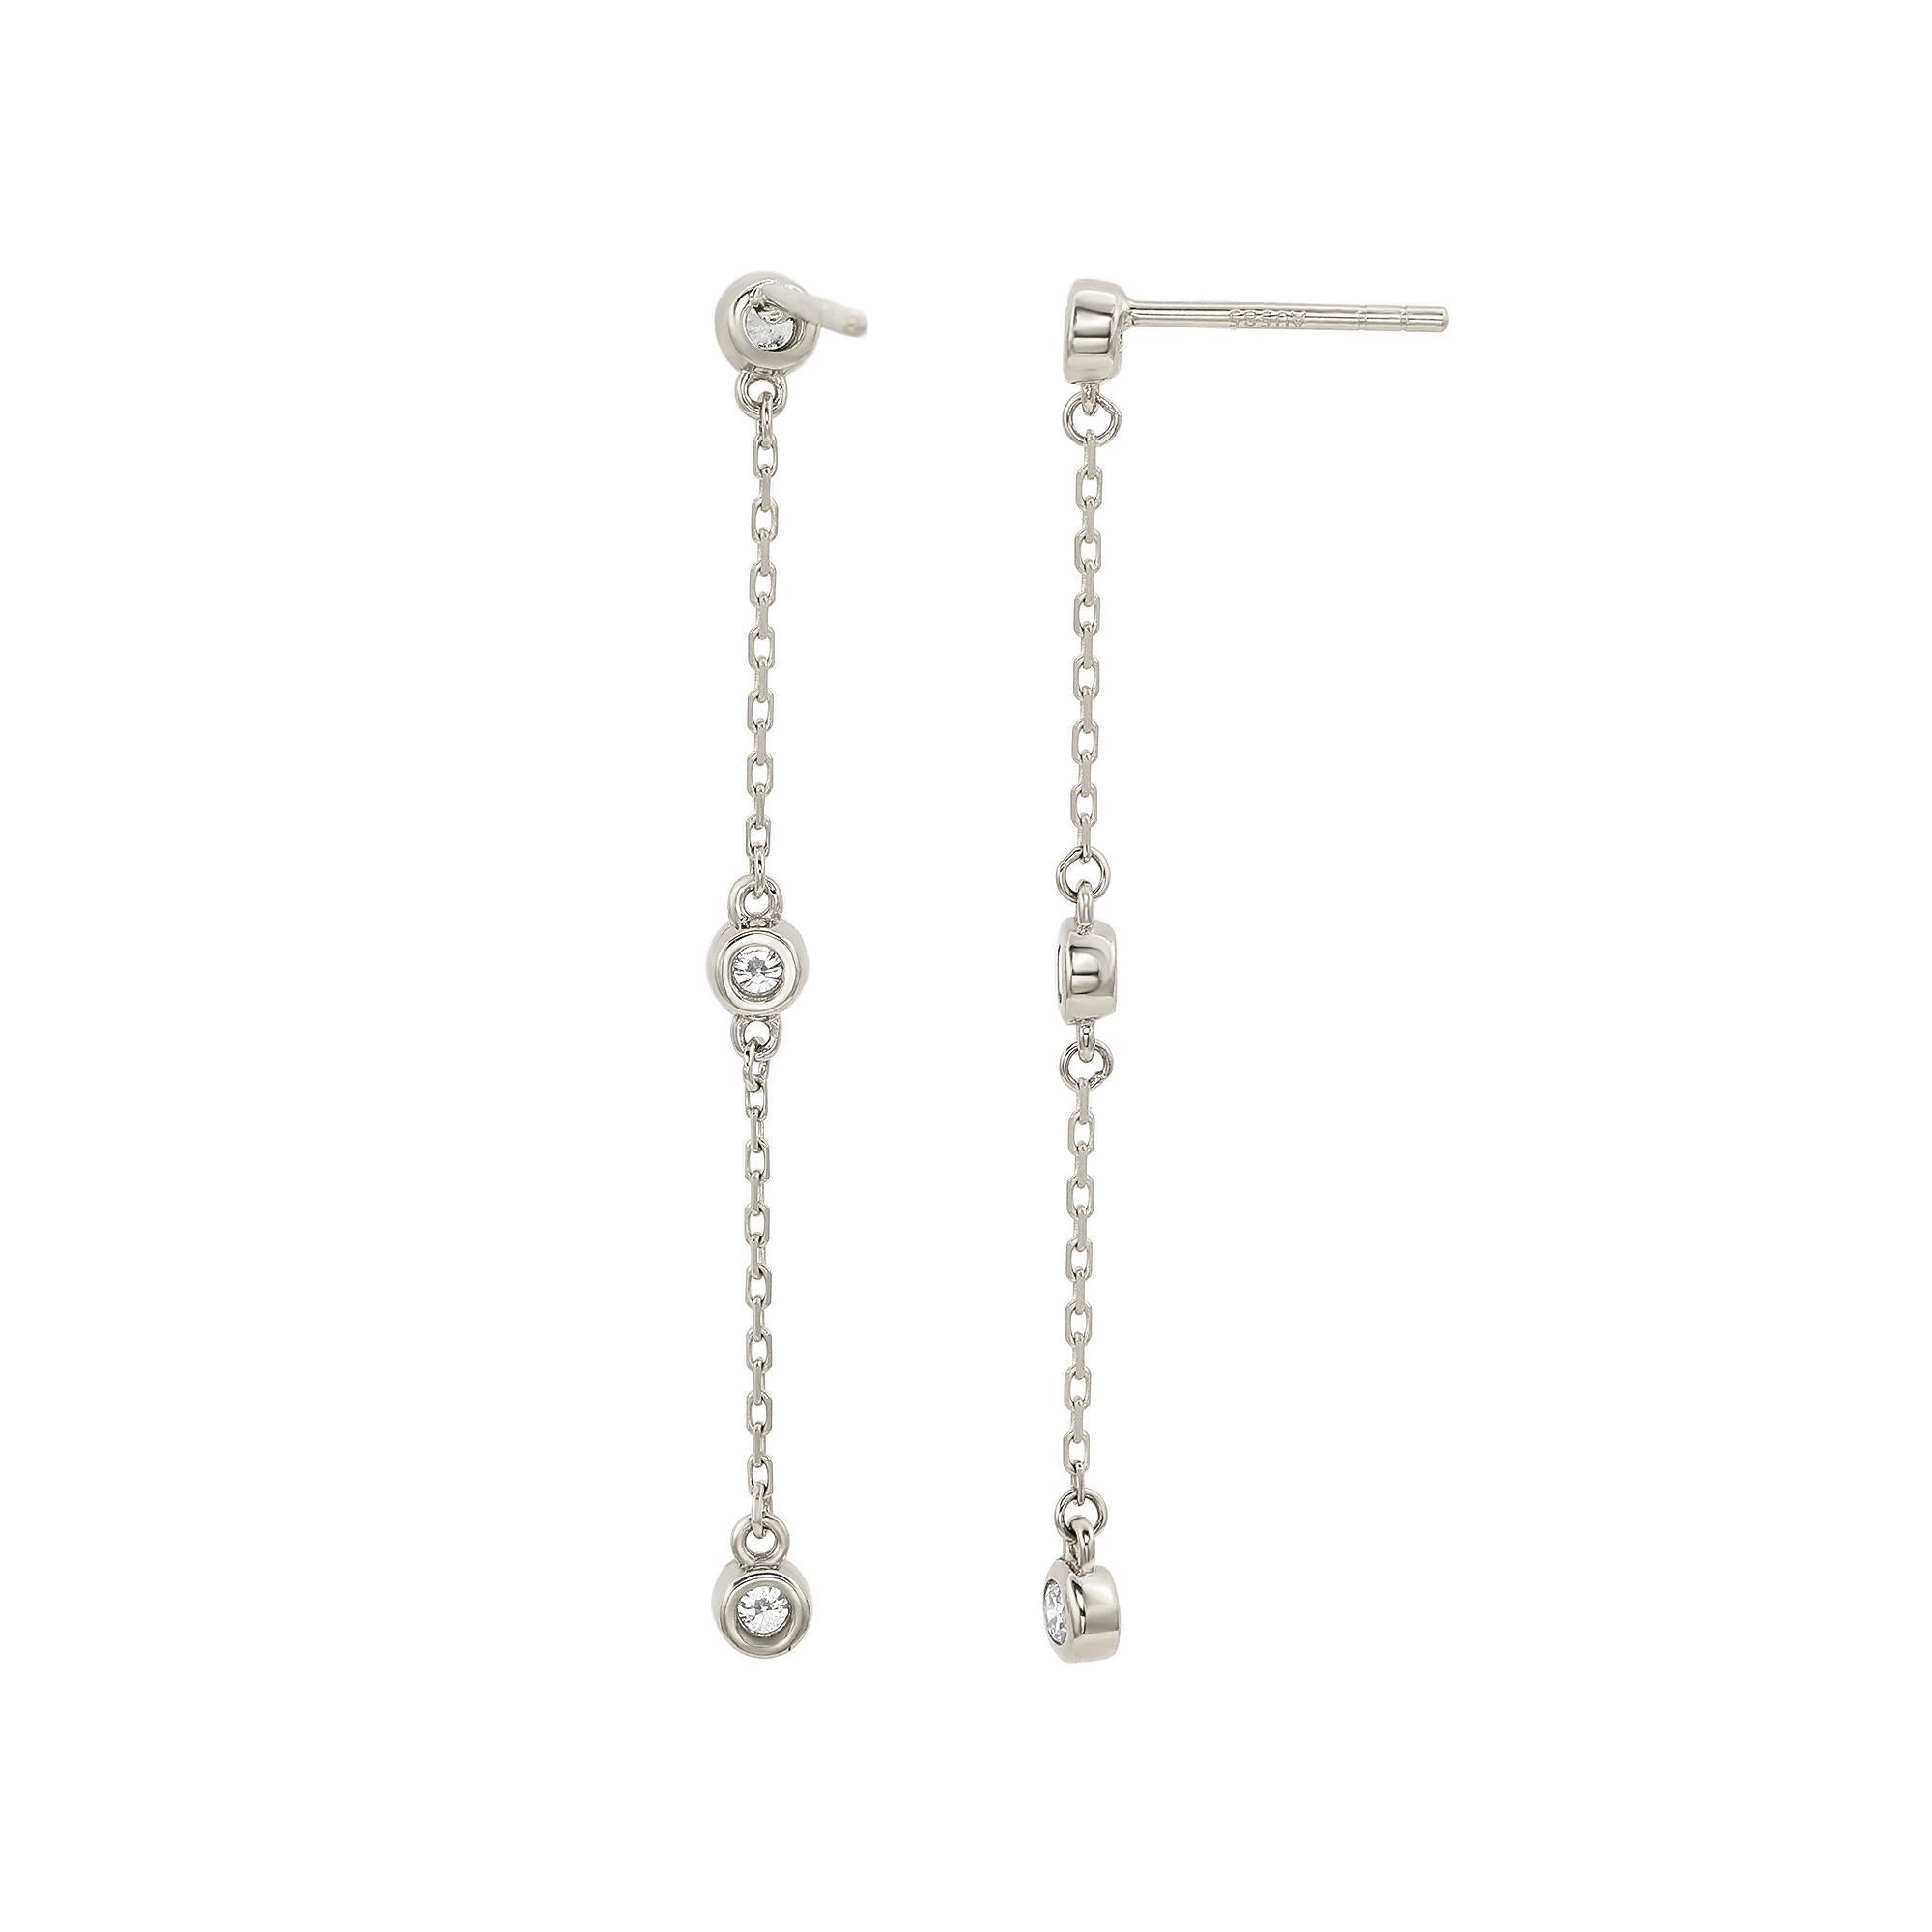 A touch of dazzle and a lot of style, these dangle earrings add a fashionable touch to any attire. Sleek and polished in solid white gold, these stylish earrings showcase a station design of bezel set 6 round cut white diamonds totaling 4/5 CTTW.